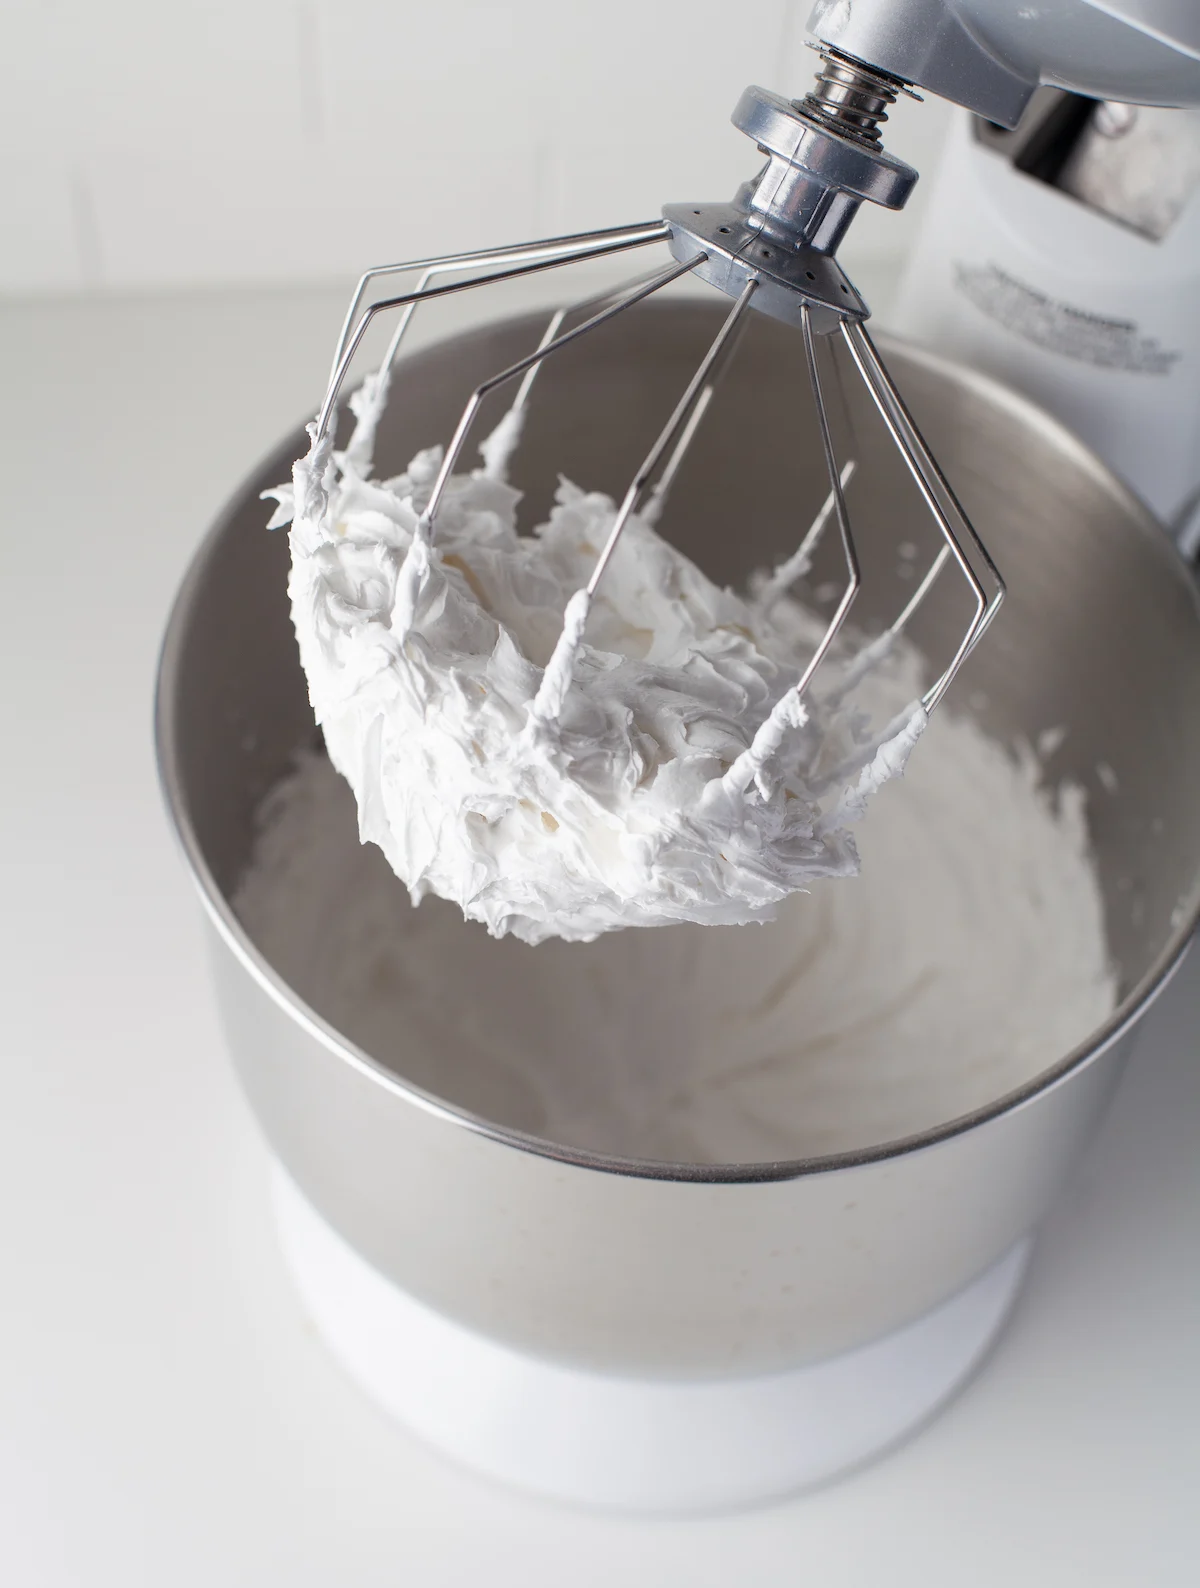 Icing ingredients whisked together in a bowl